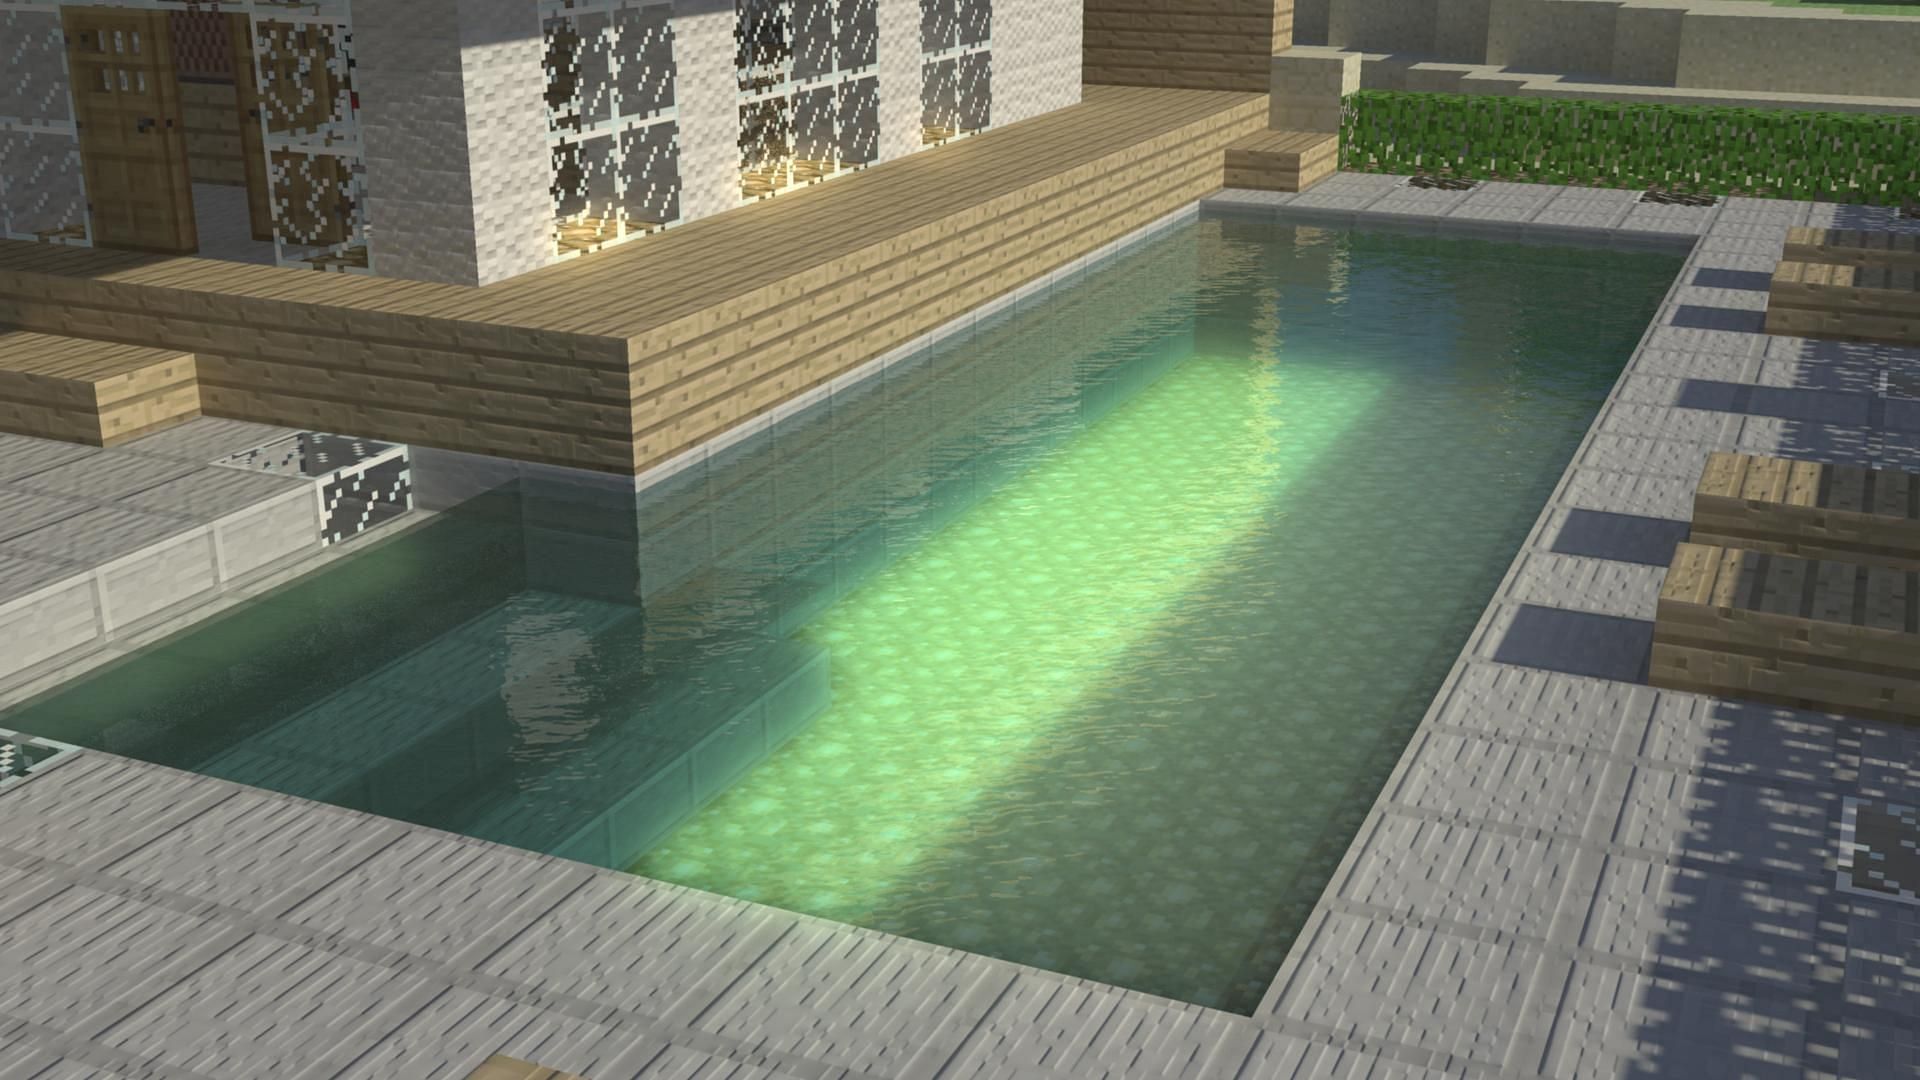 Swimming pool in Minecraft (Image via Minecraft gallery)